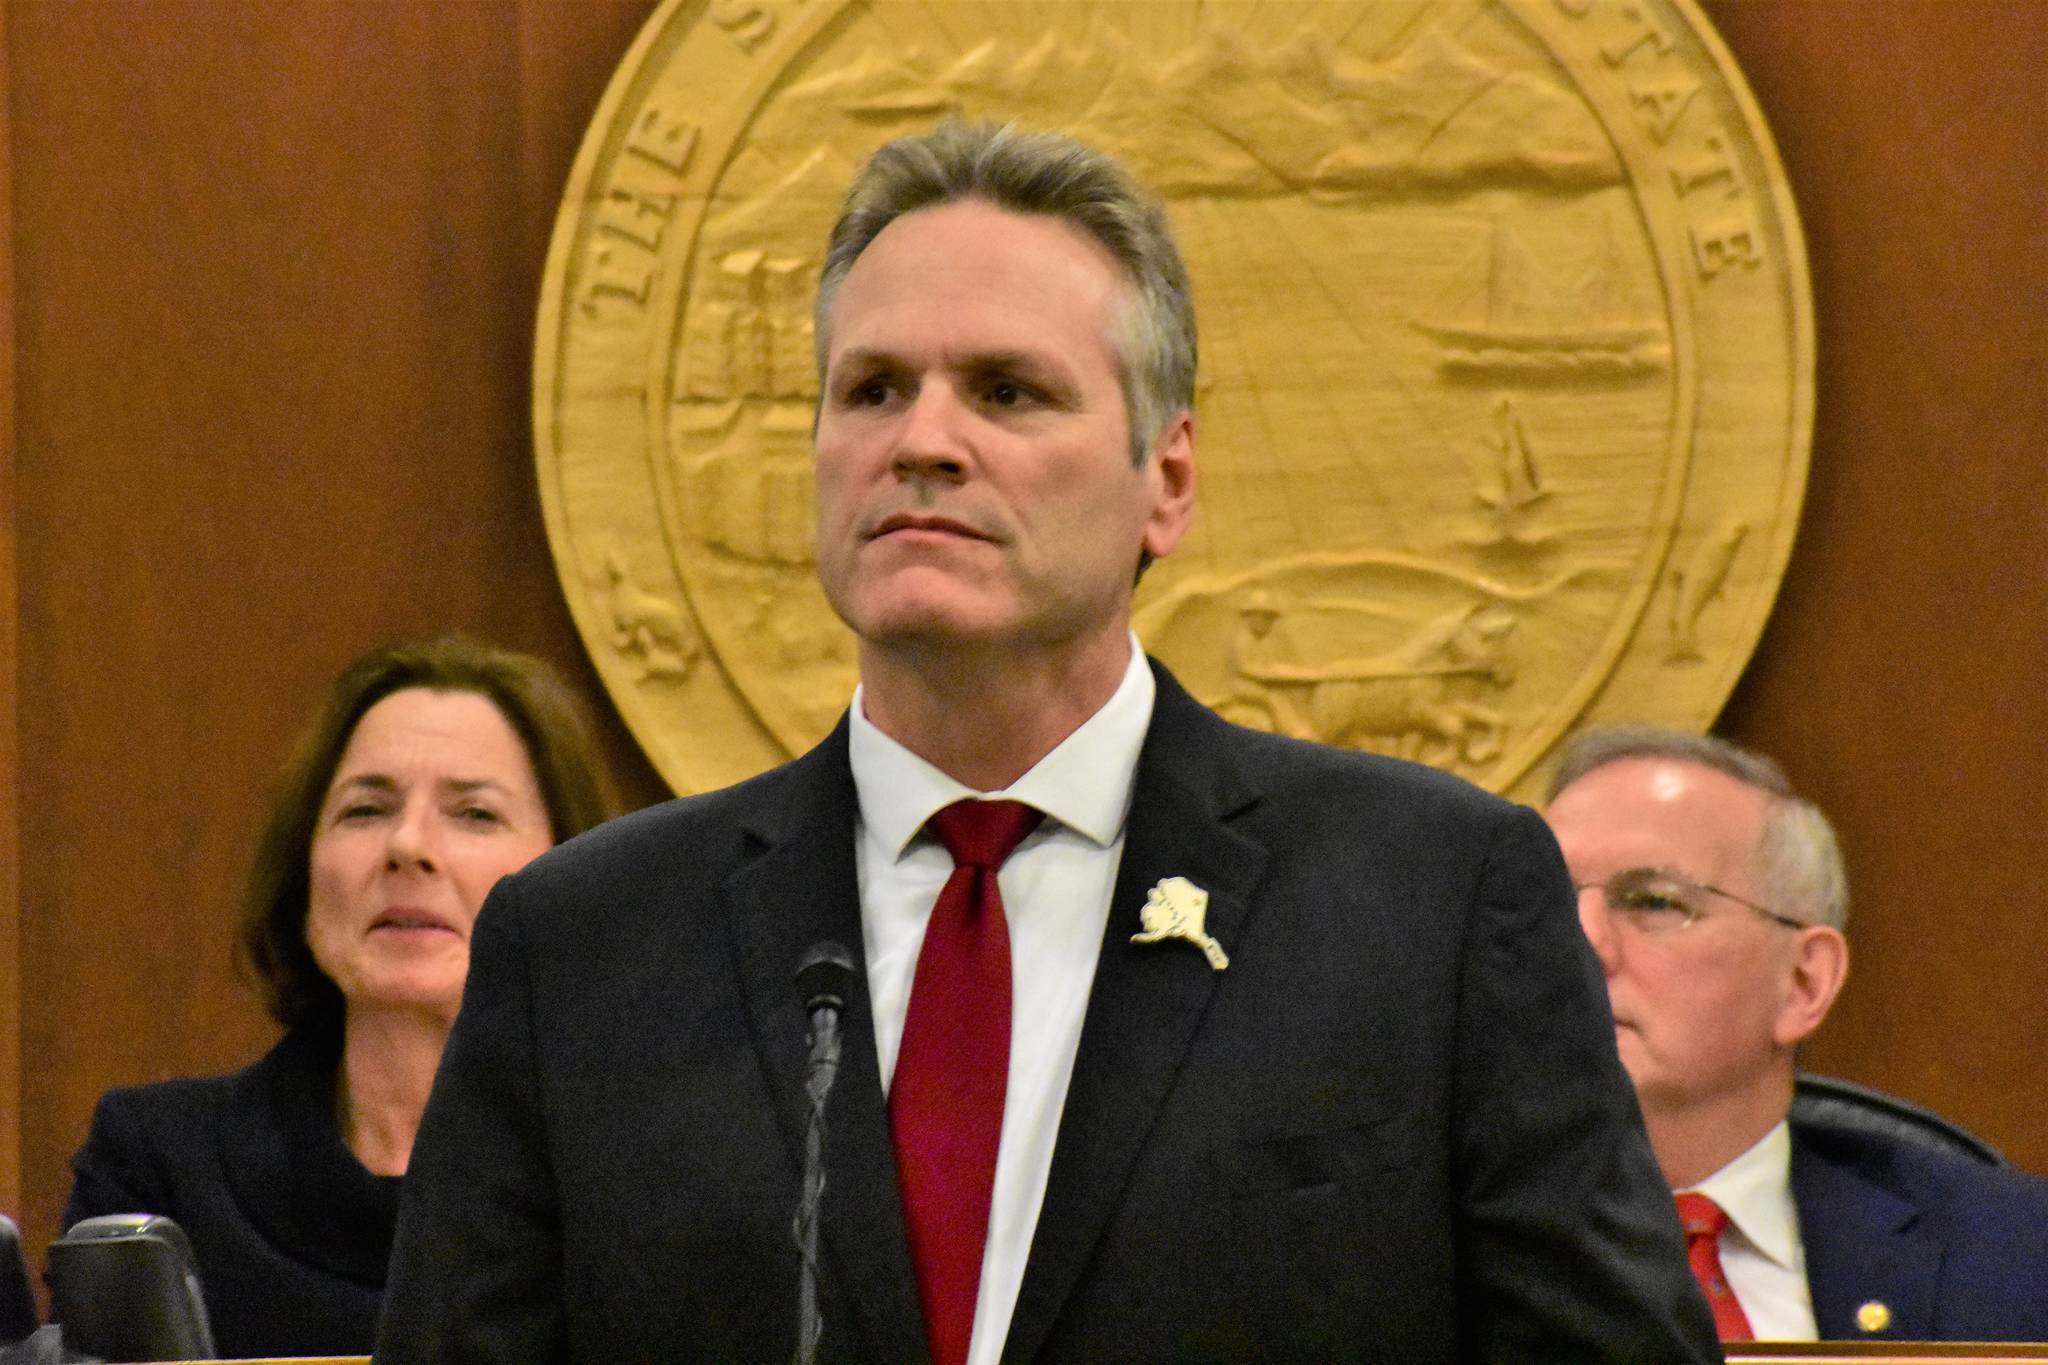 Gov. Mike Dunleavy, seen here giving his 2020 State of the State address before a joint session of the Alaska Legislature on Monday, Jan. 27, 2020, announced this year's address would be virtual due to health concerns related to the pandemic. (Peter Segall/ Juneau Empire File)